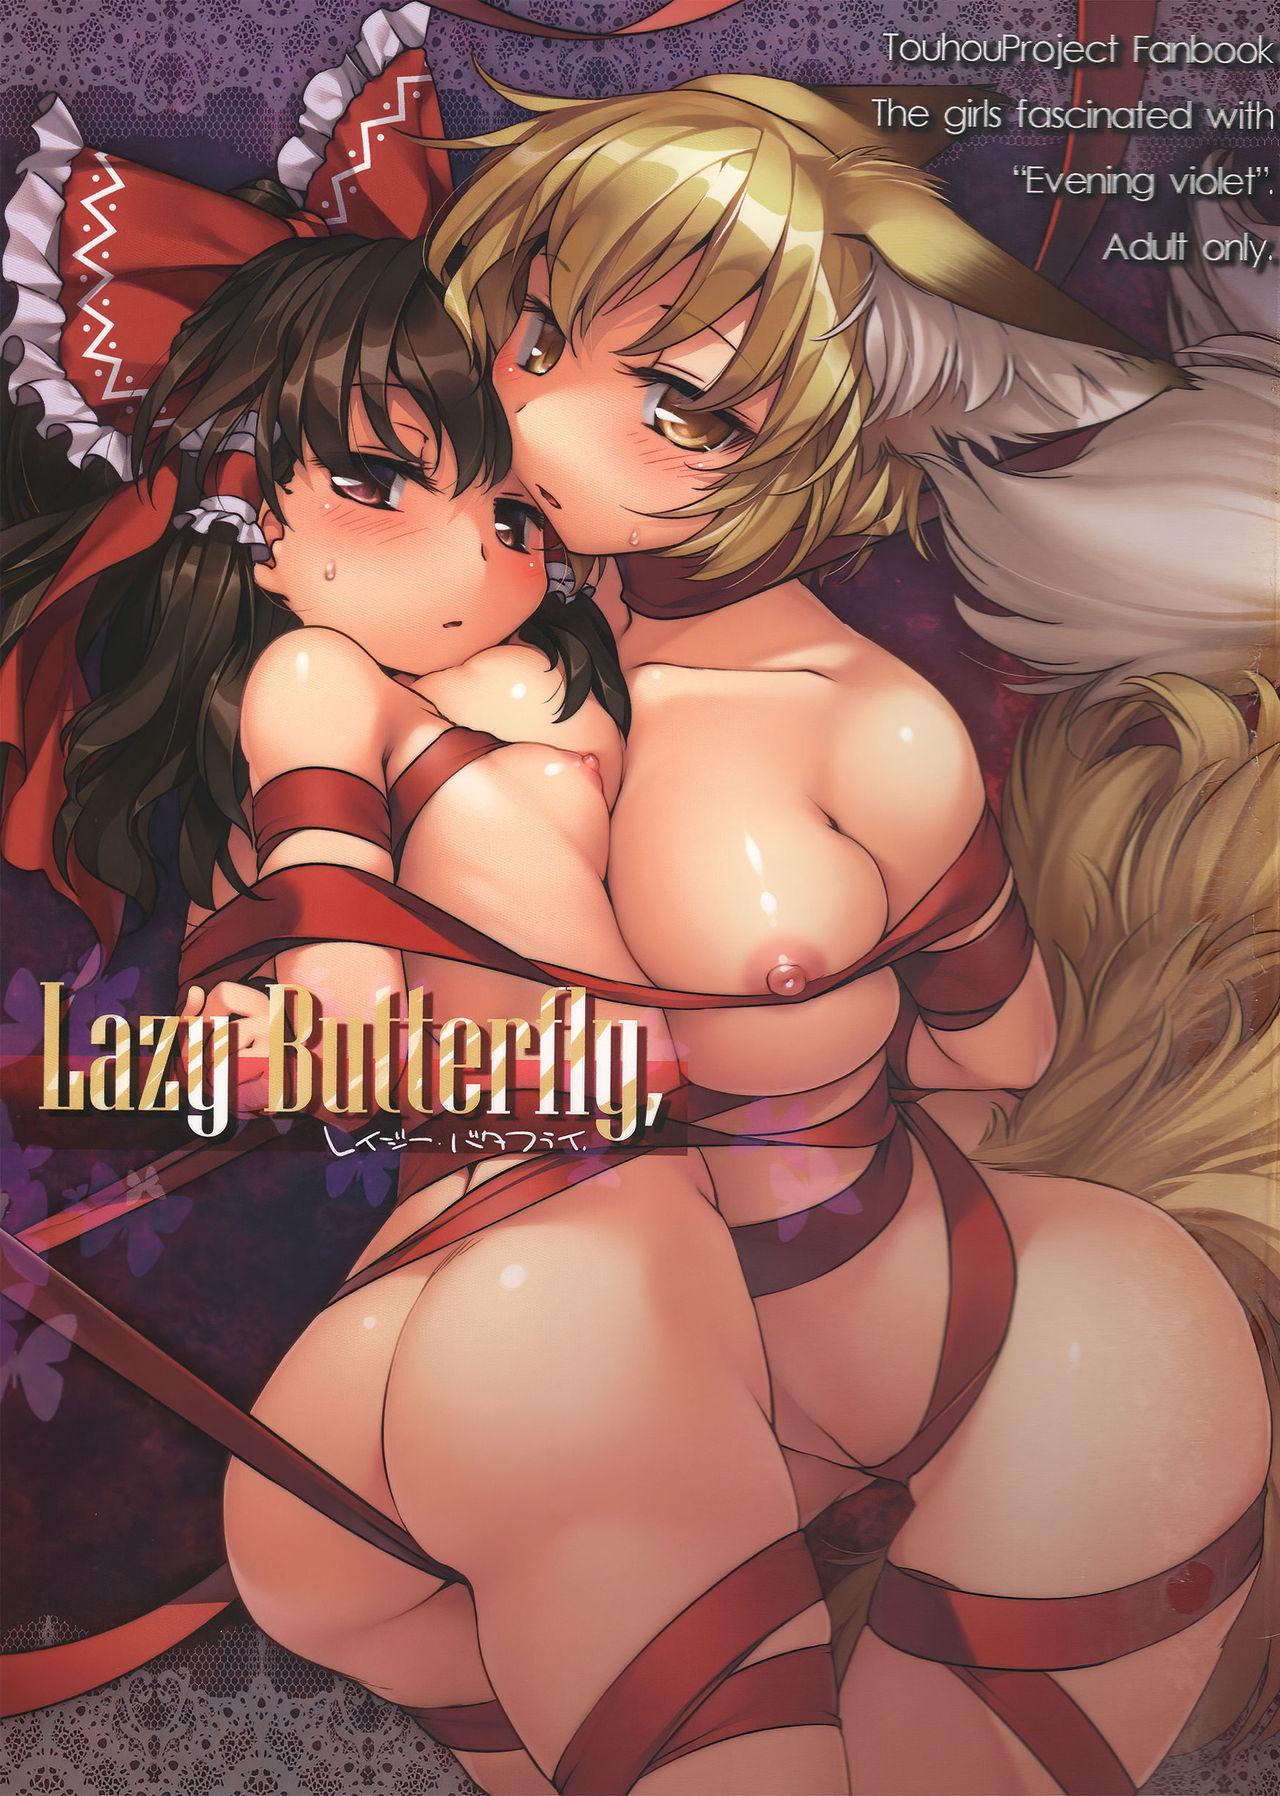 Tia Lazy Butterfly - Touhou project Perfect Girl Porn - Page 1